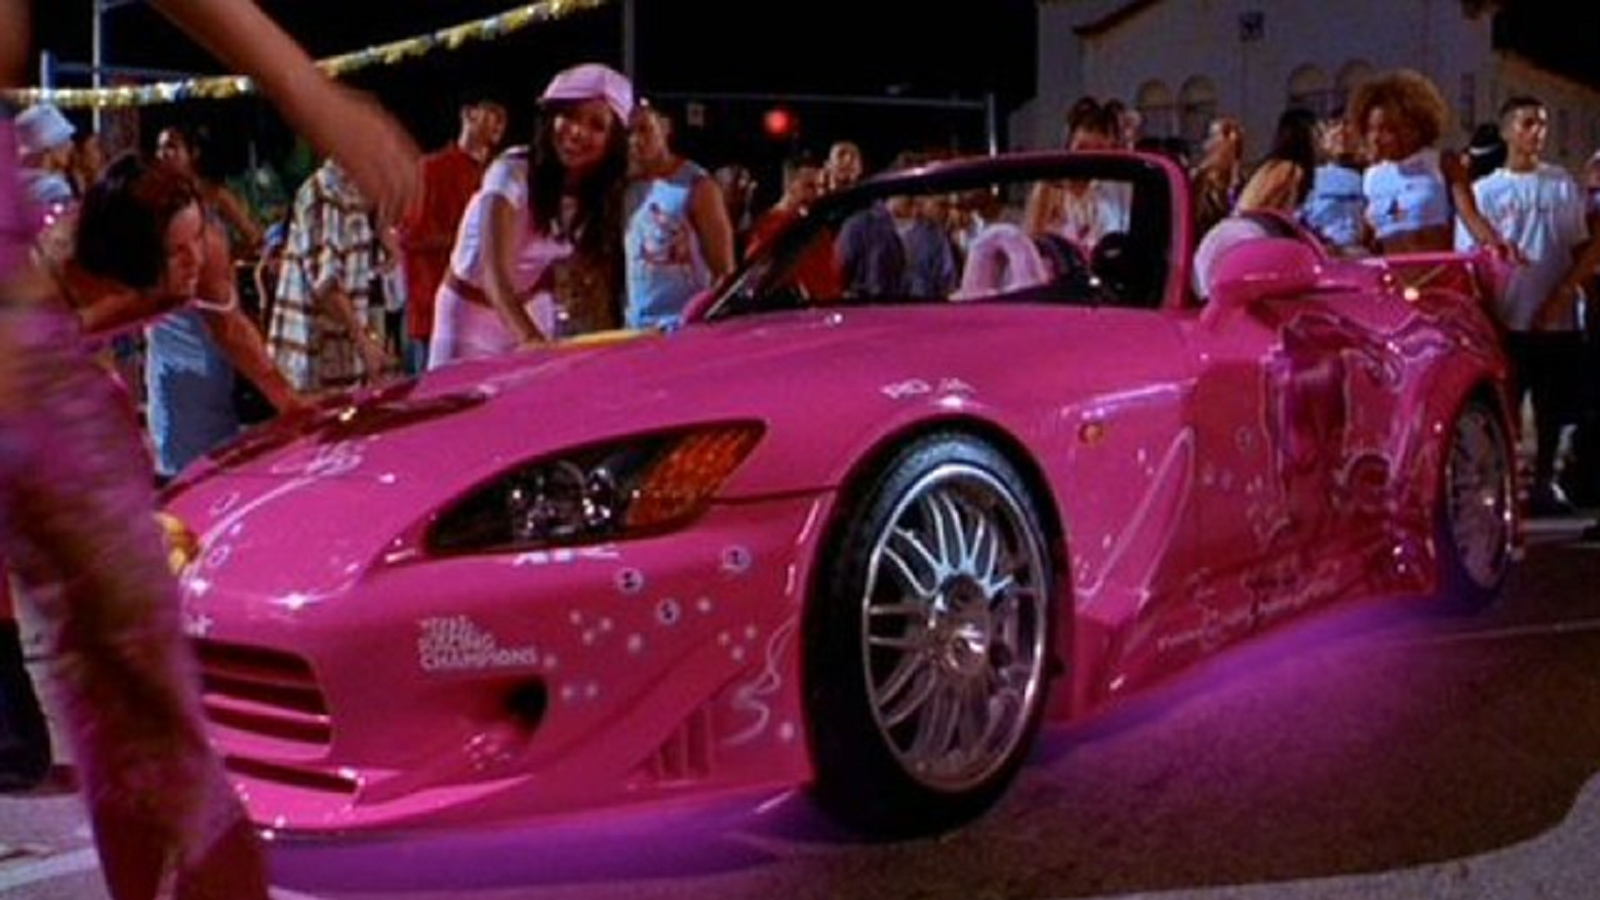 2 fast 2 furious pink s2000